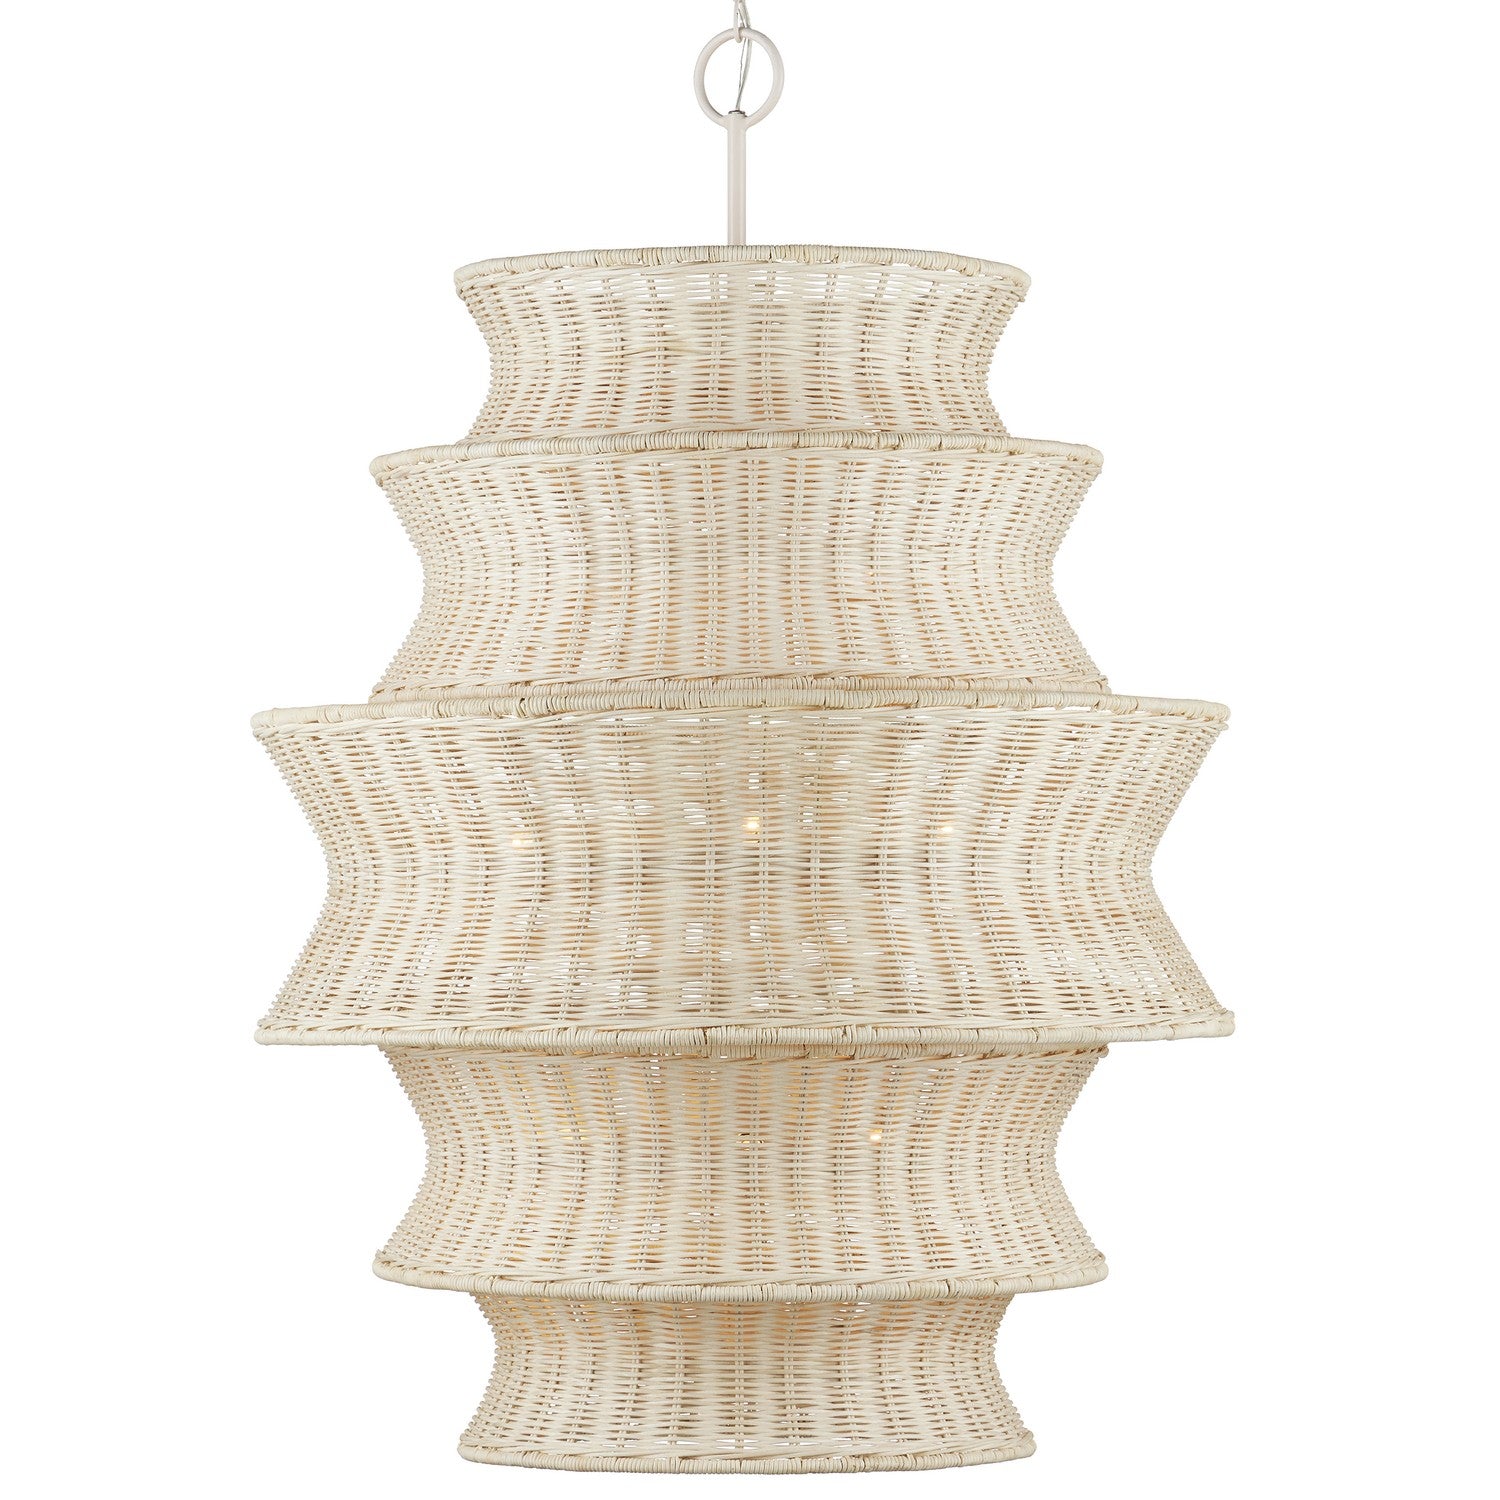 Currey and Company - 9000-1083 - Nine Light Chandelier - Bleached Natural/Vanilla